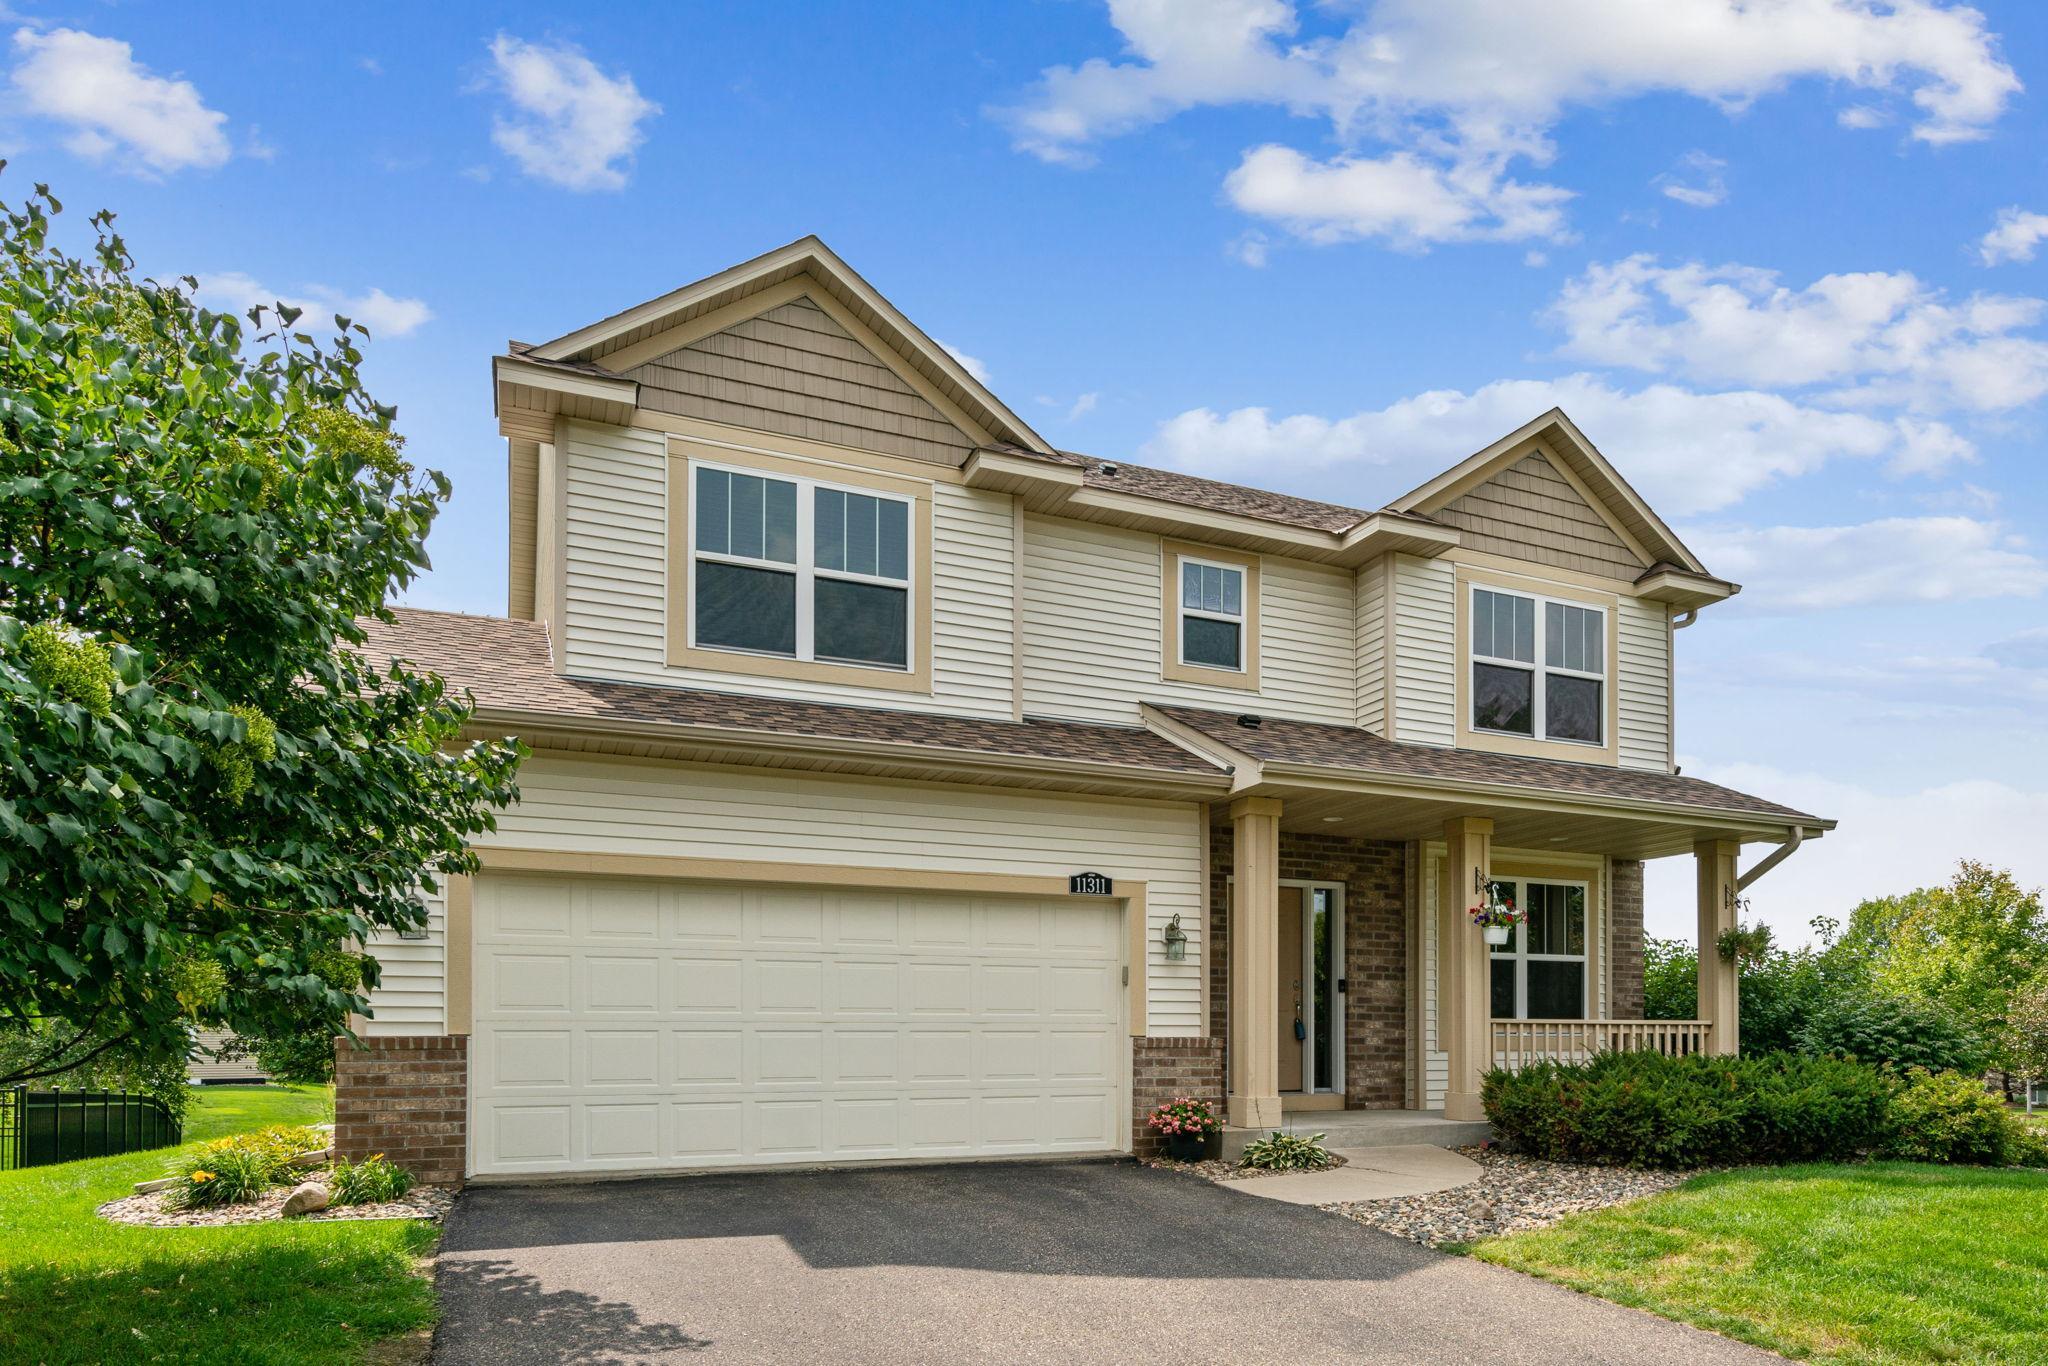 Welcome Home to fabulous Stonemill Farms 2-story!